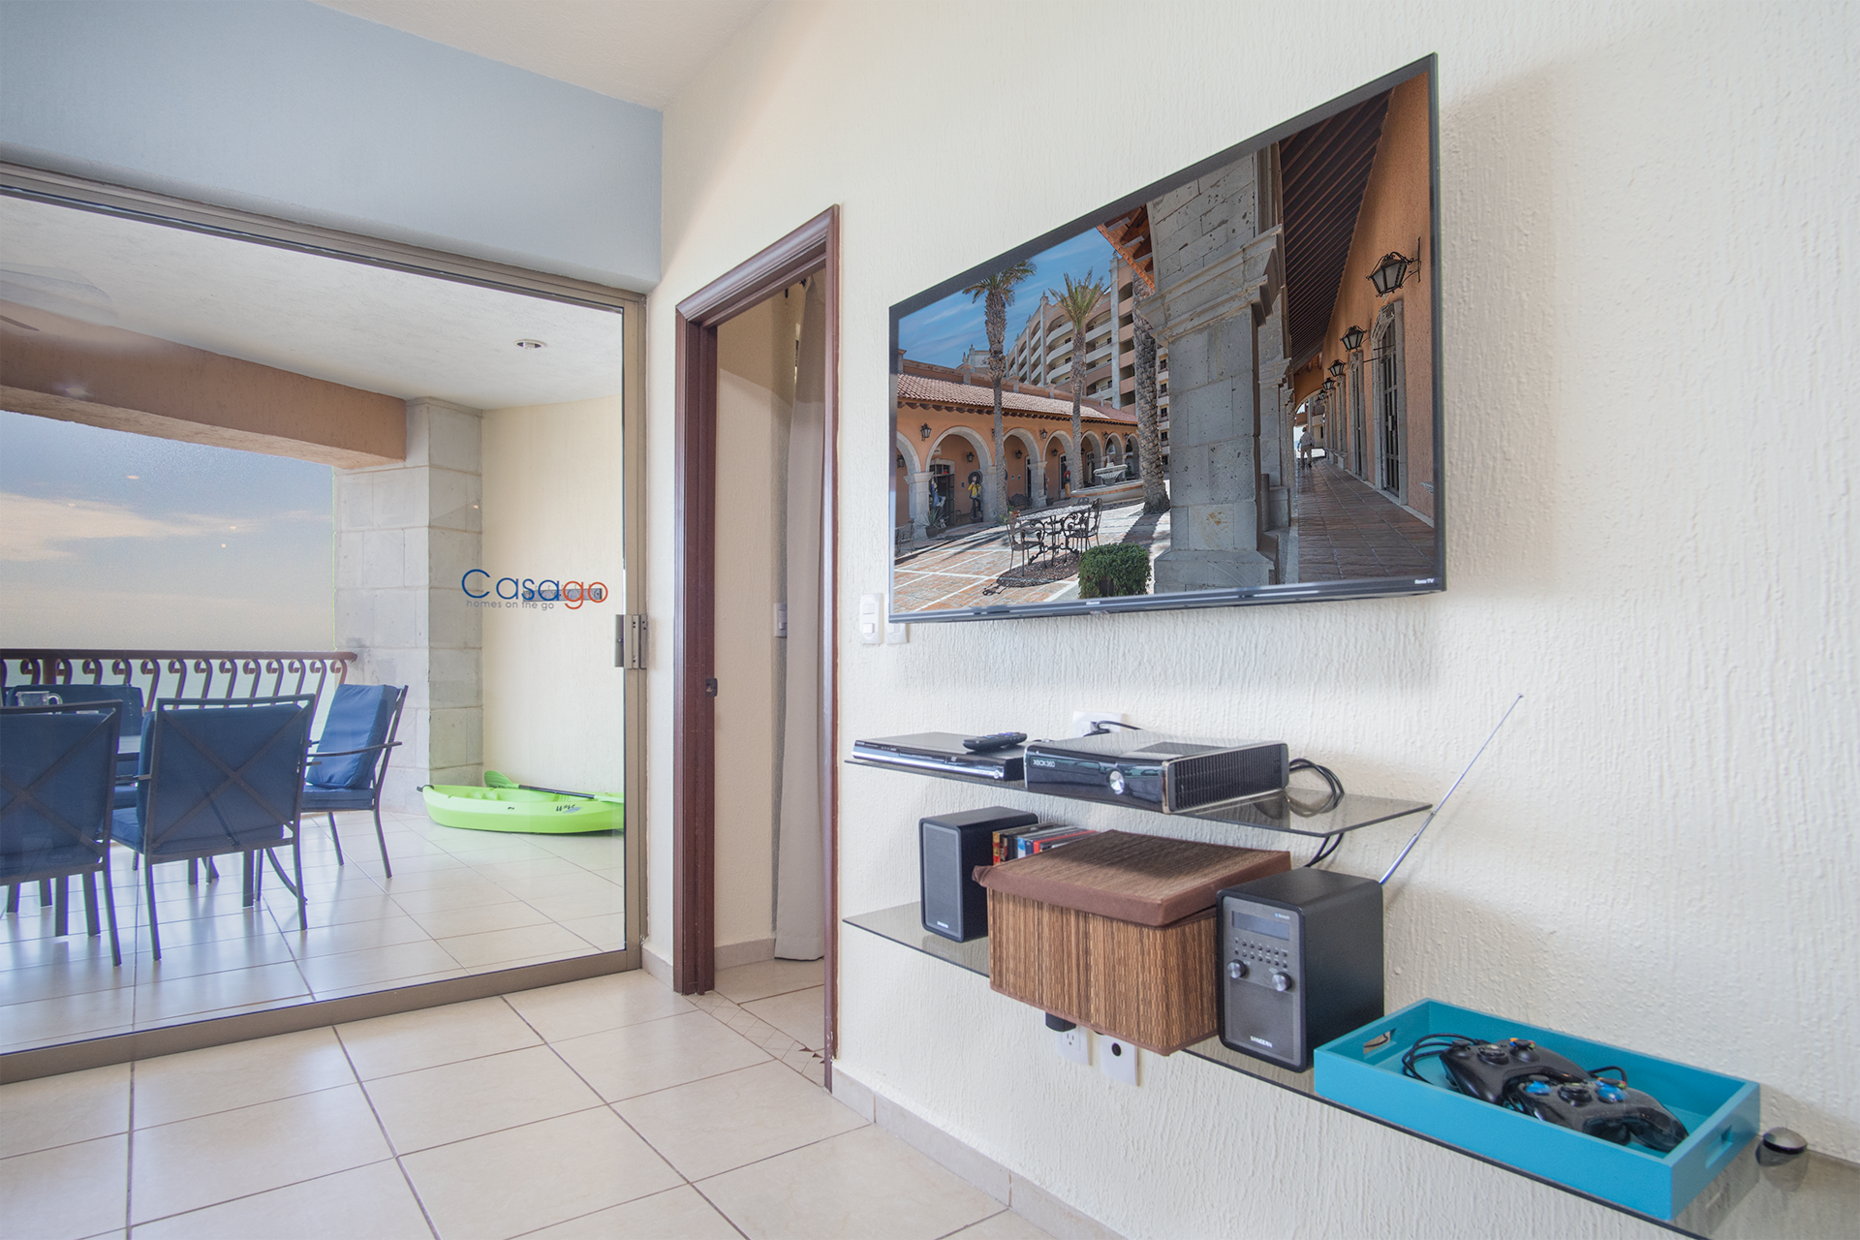 TV in the living room with gate system